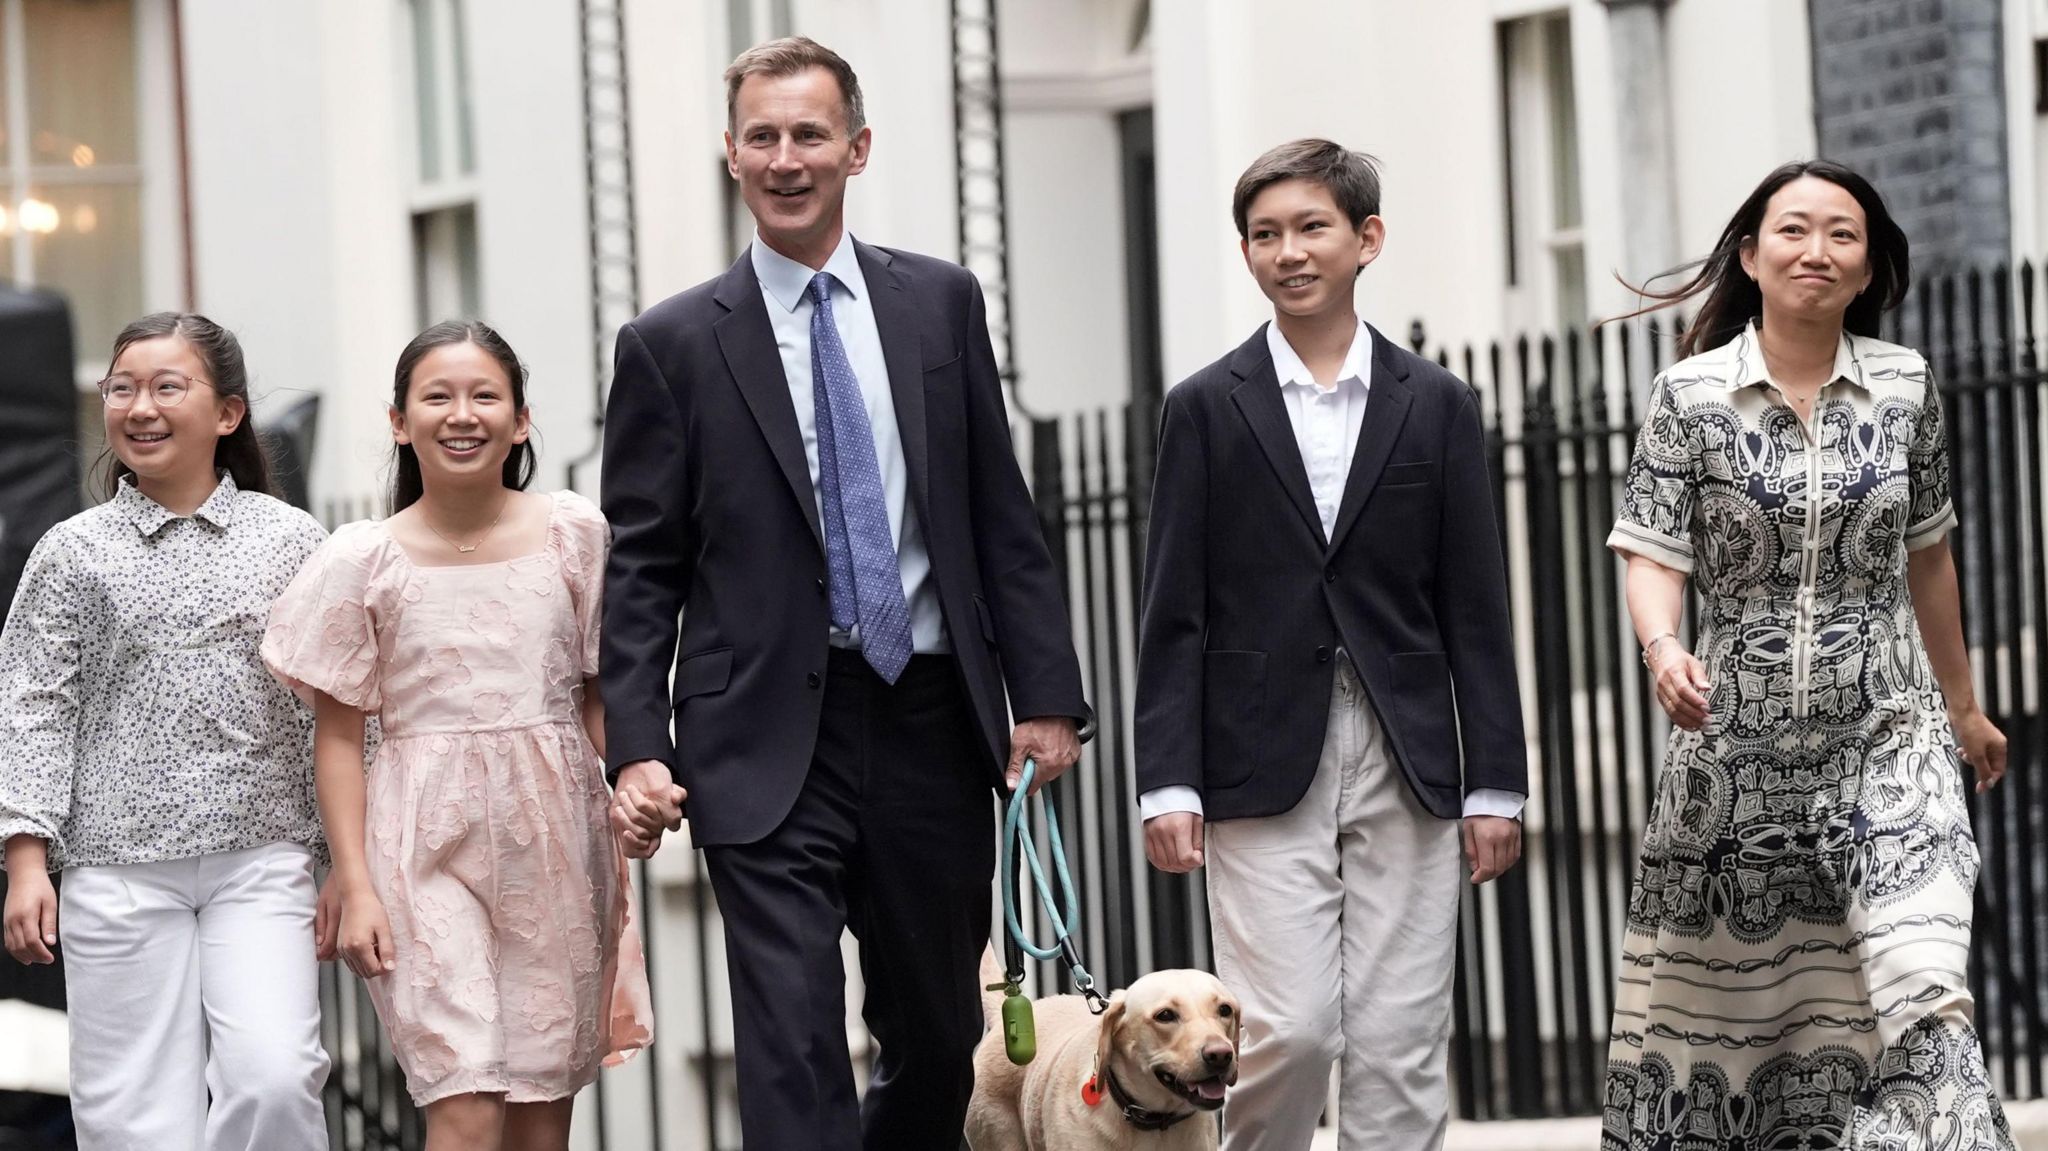 Outgoing Conservative chancellor of the exchequer Jeremy Hunt, with his wife Lucia Hunt and their children Jack, Anna and Eleanor leave 11 Downing Street after the Labour party won a